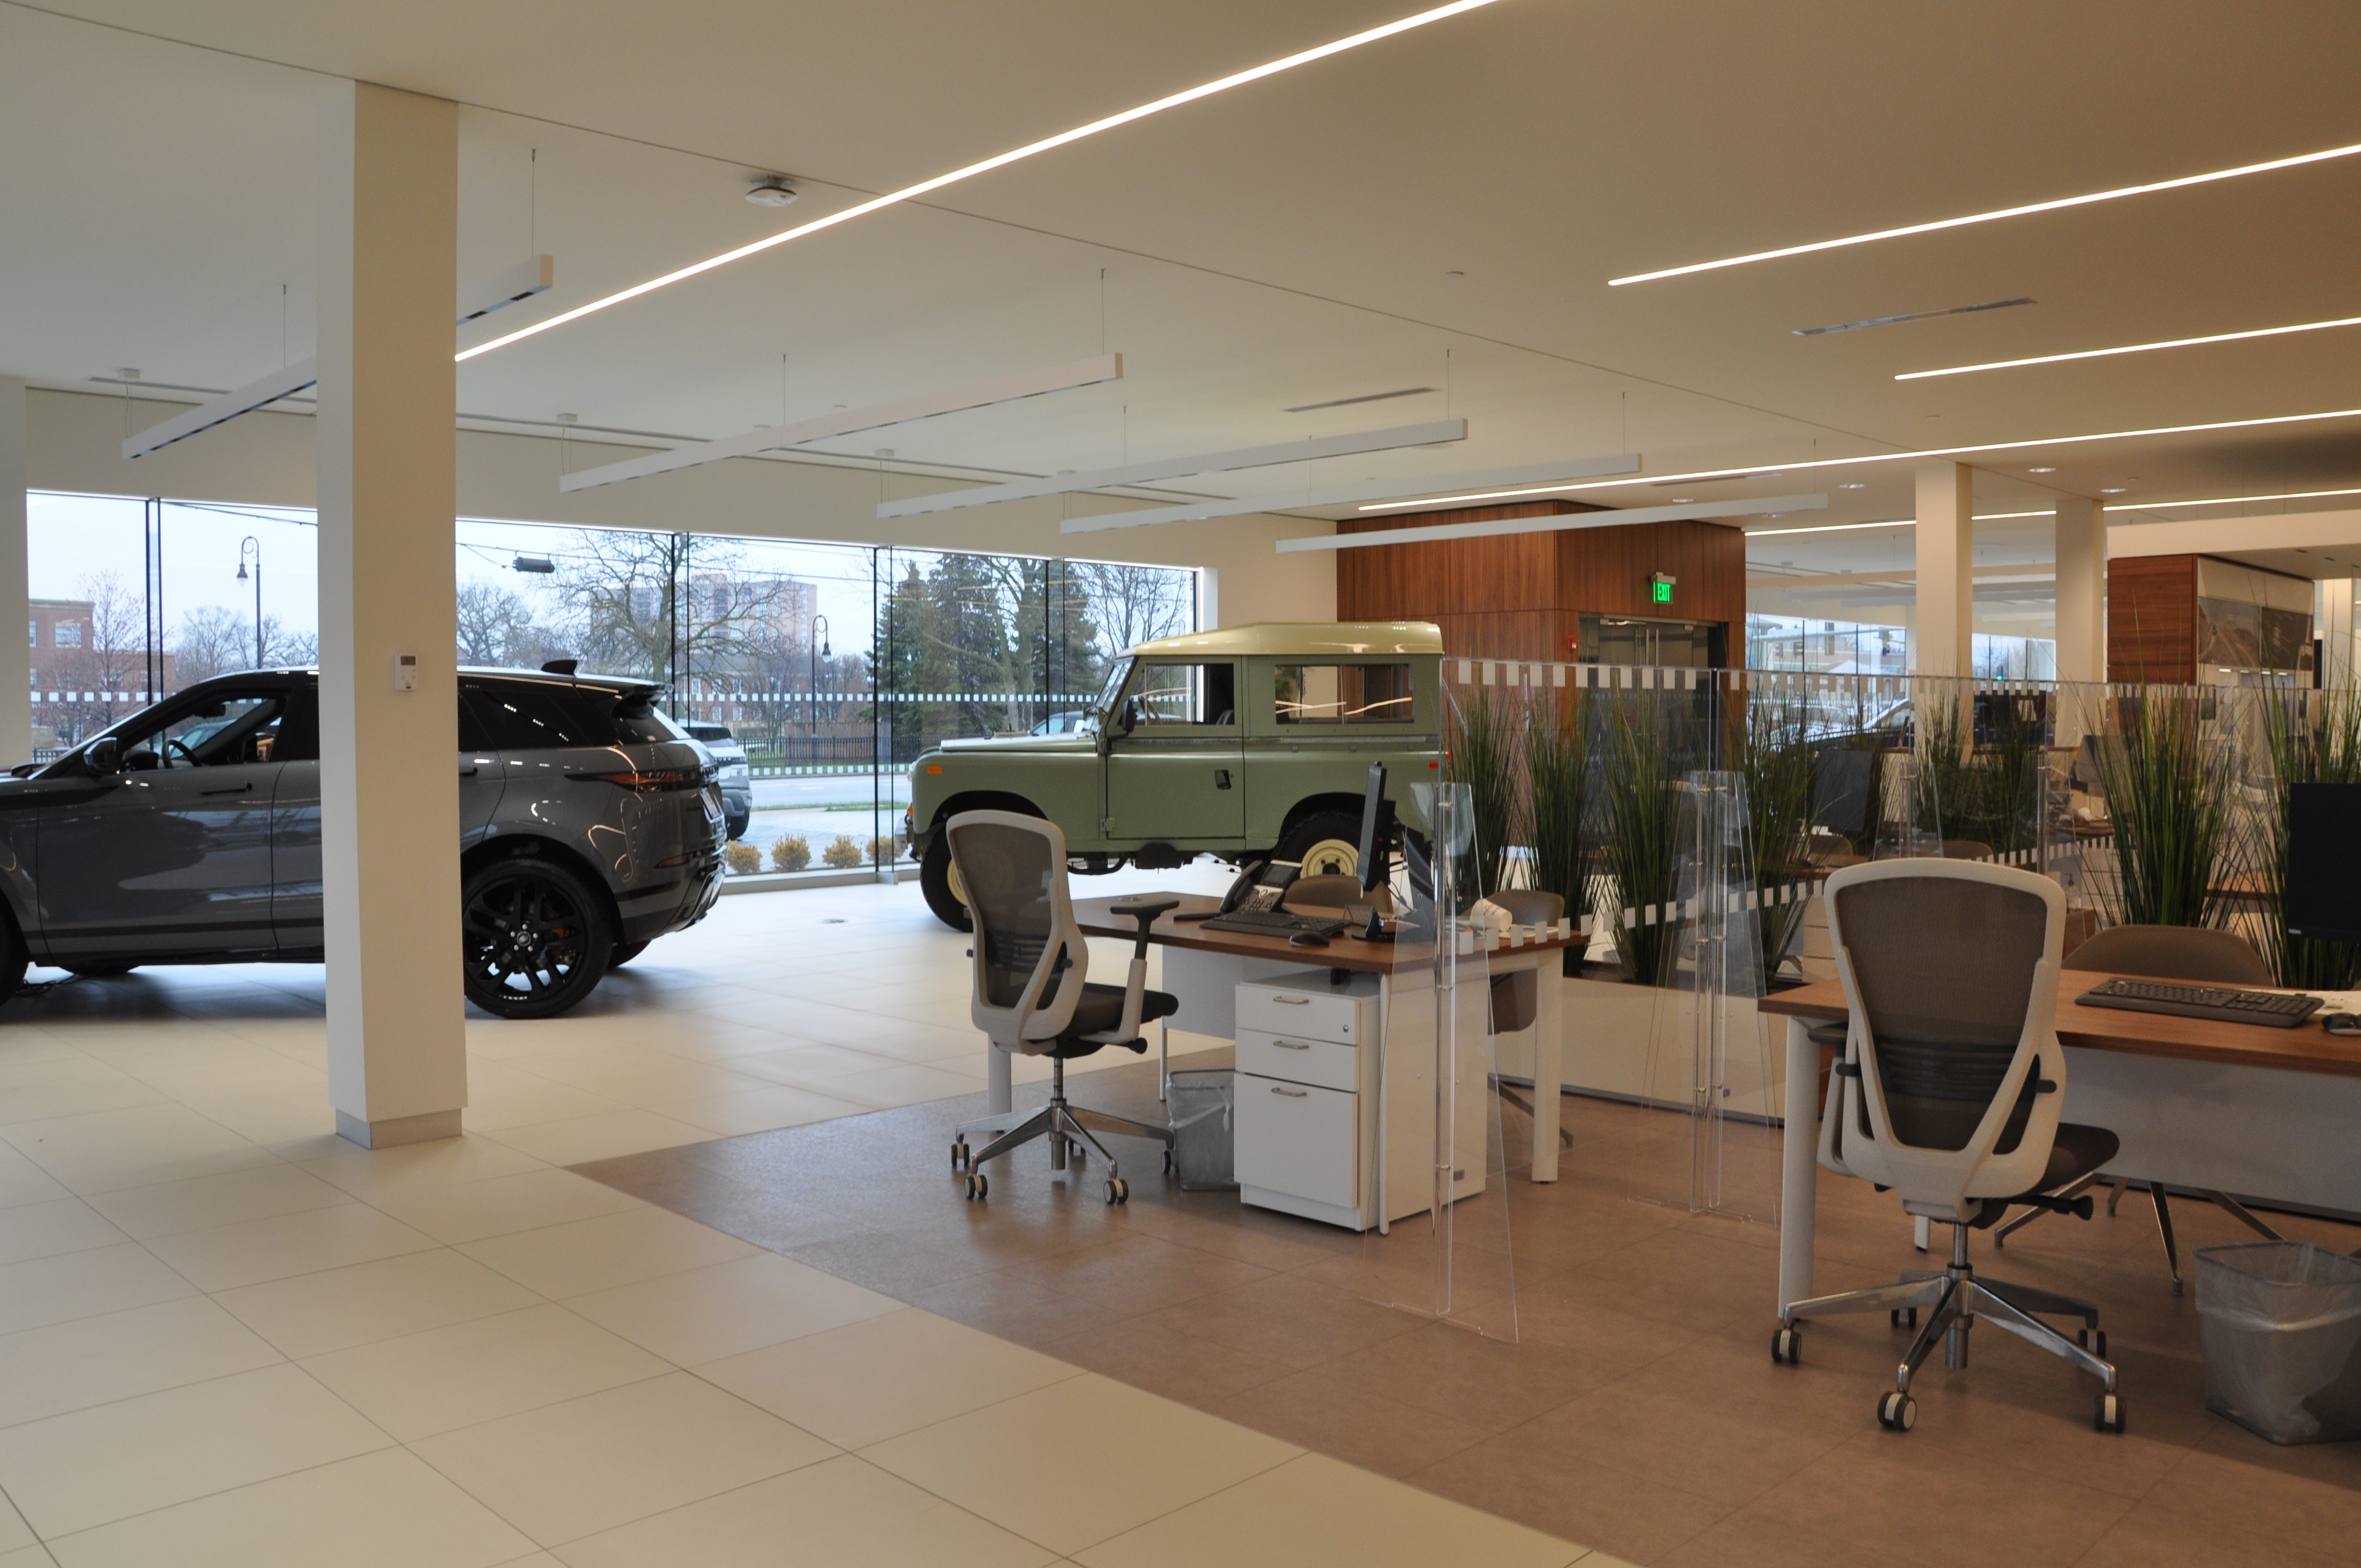 Image 6 | Land Rover Hinsdale